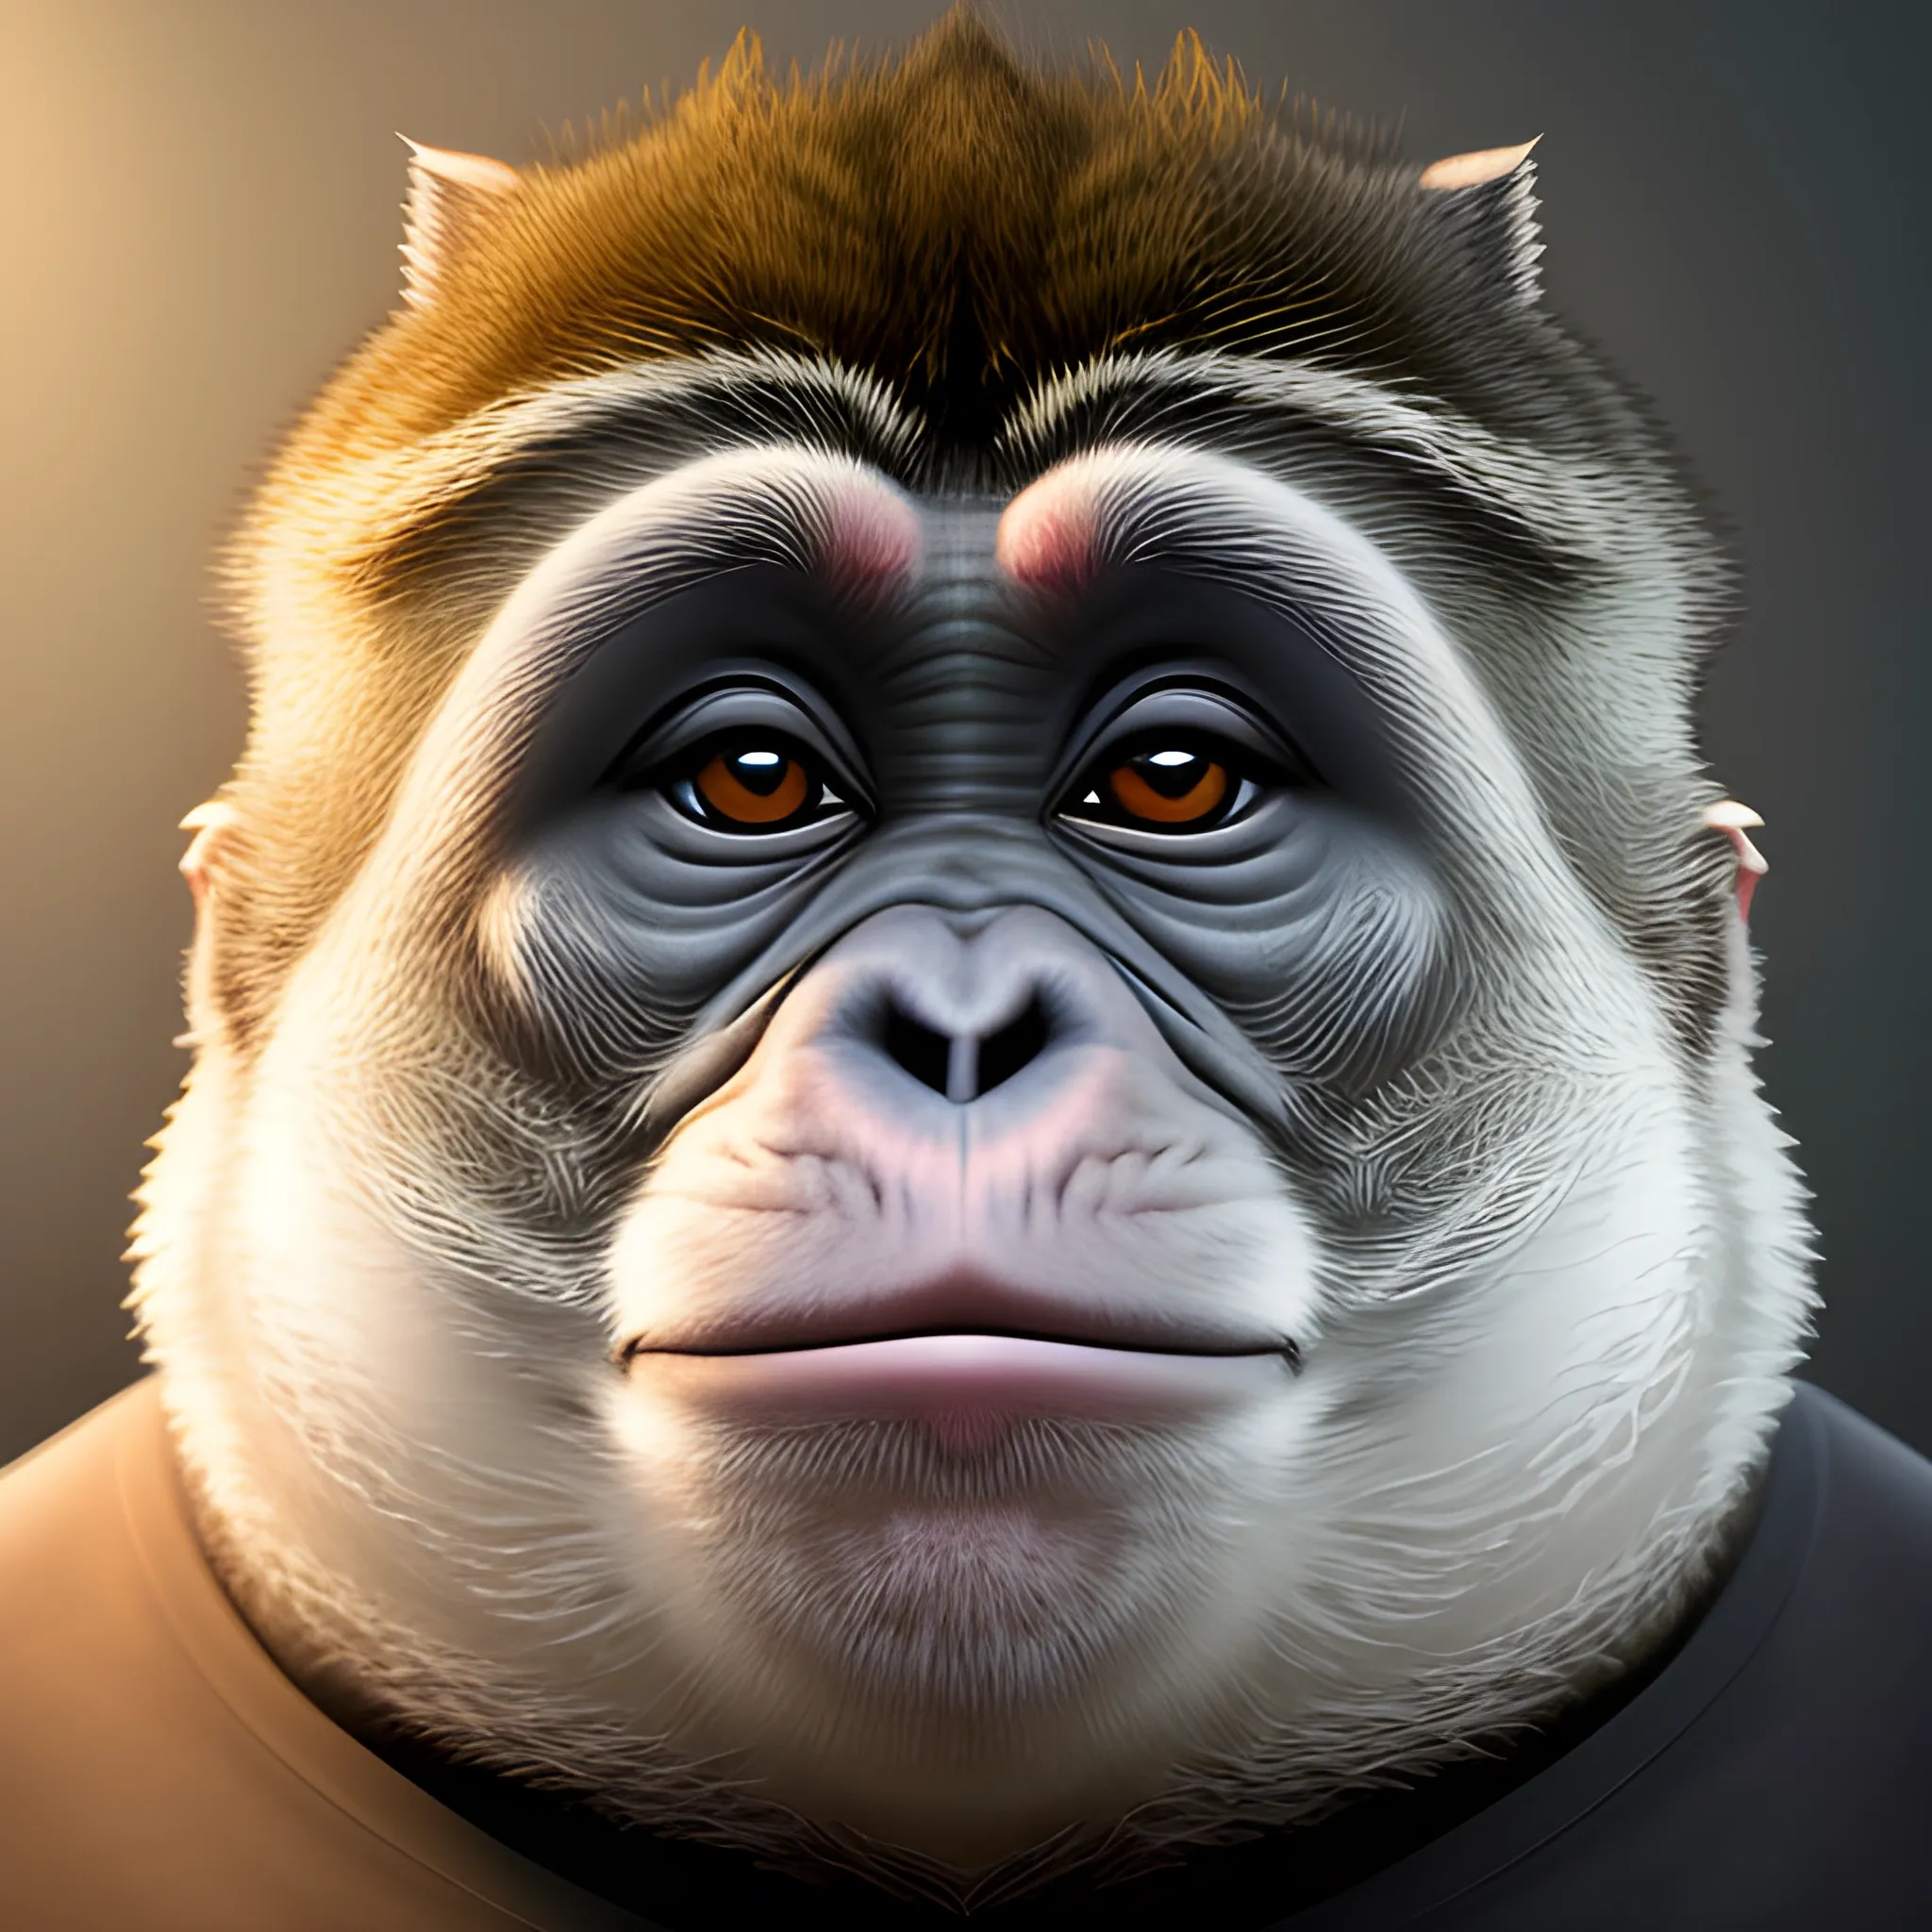 A detailed and intricate digital art piece in a cinematic style, this ultra high resolution portrait of a fat macaque is a true masterpiece. The beautiful lighting and playful design make it a trend-setter on ArtStation. A true award-winning work.